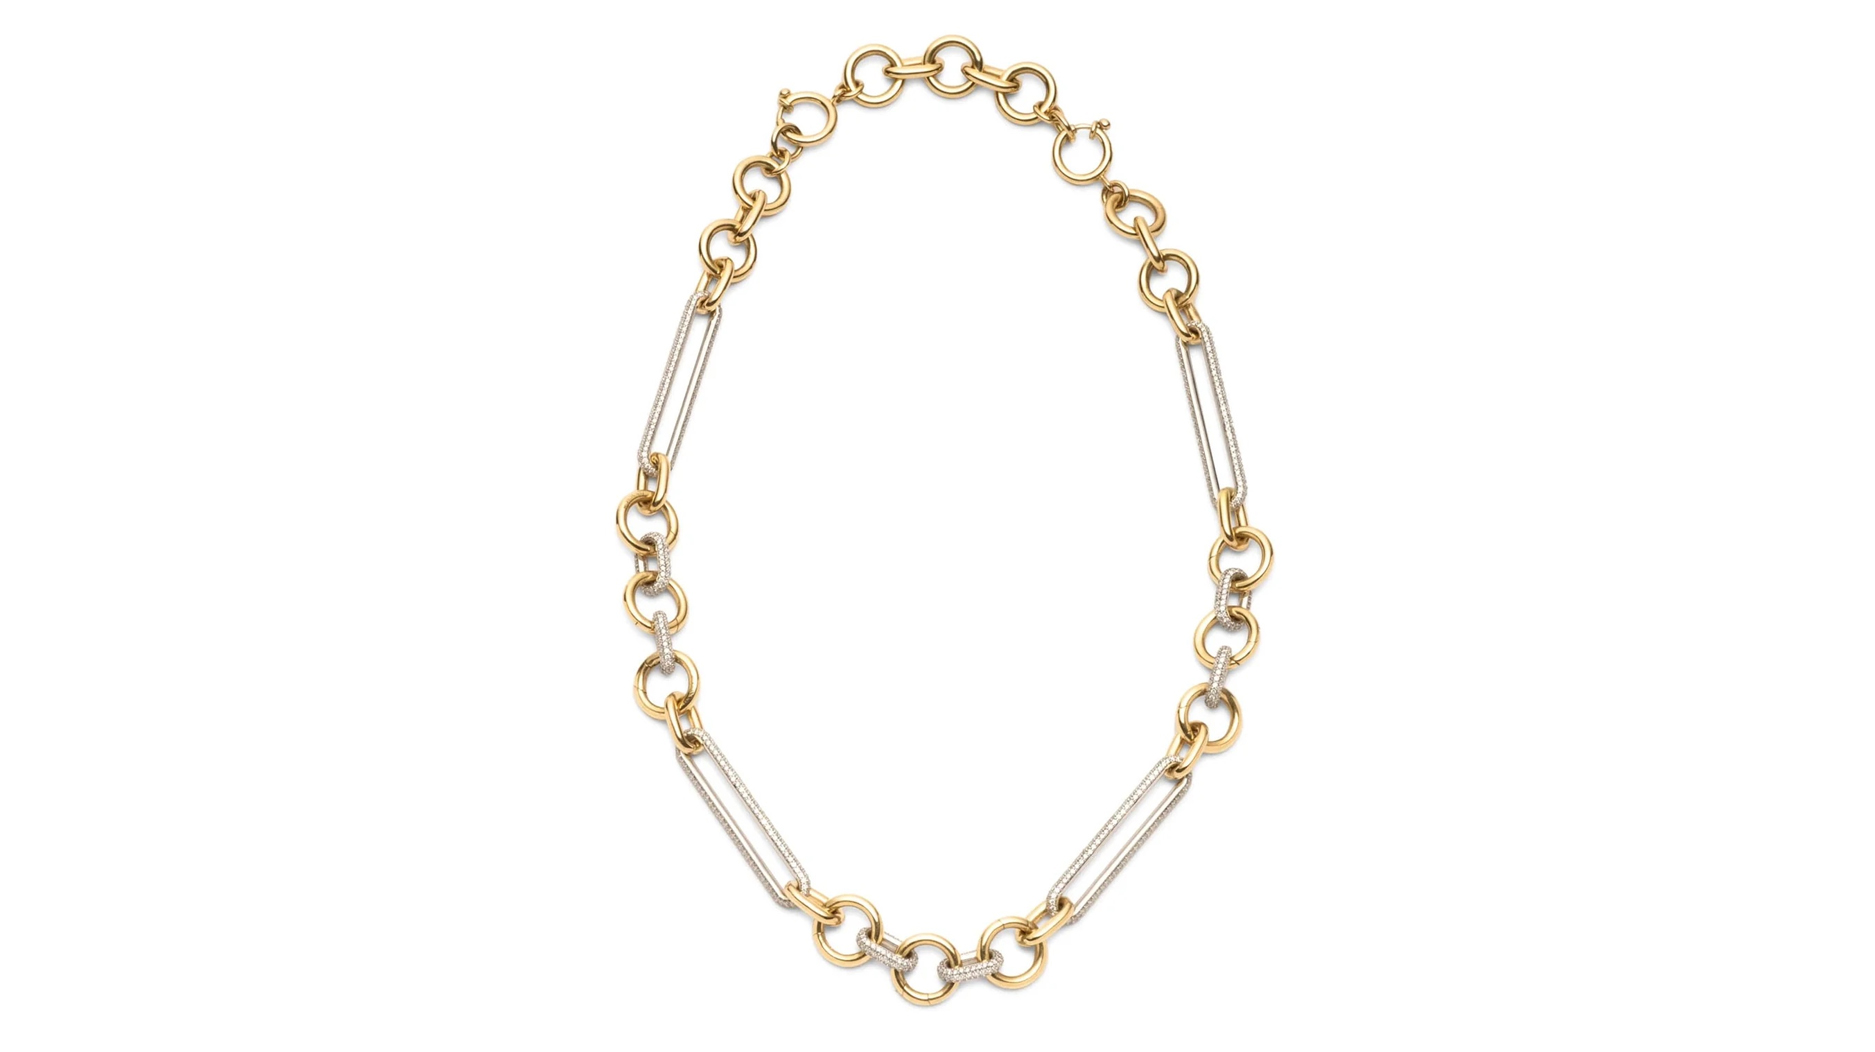 Current Jewelry Trend: Don’t Call It a Tennis Necklace | National Jeweler